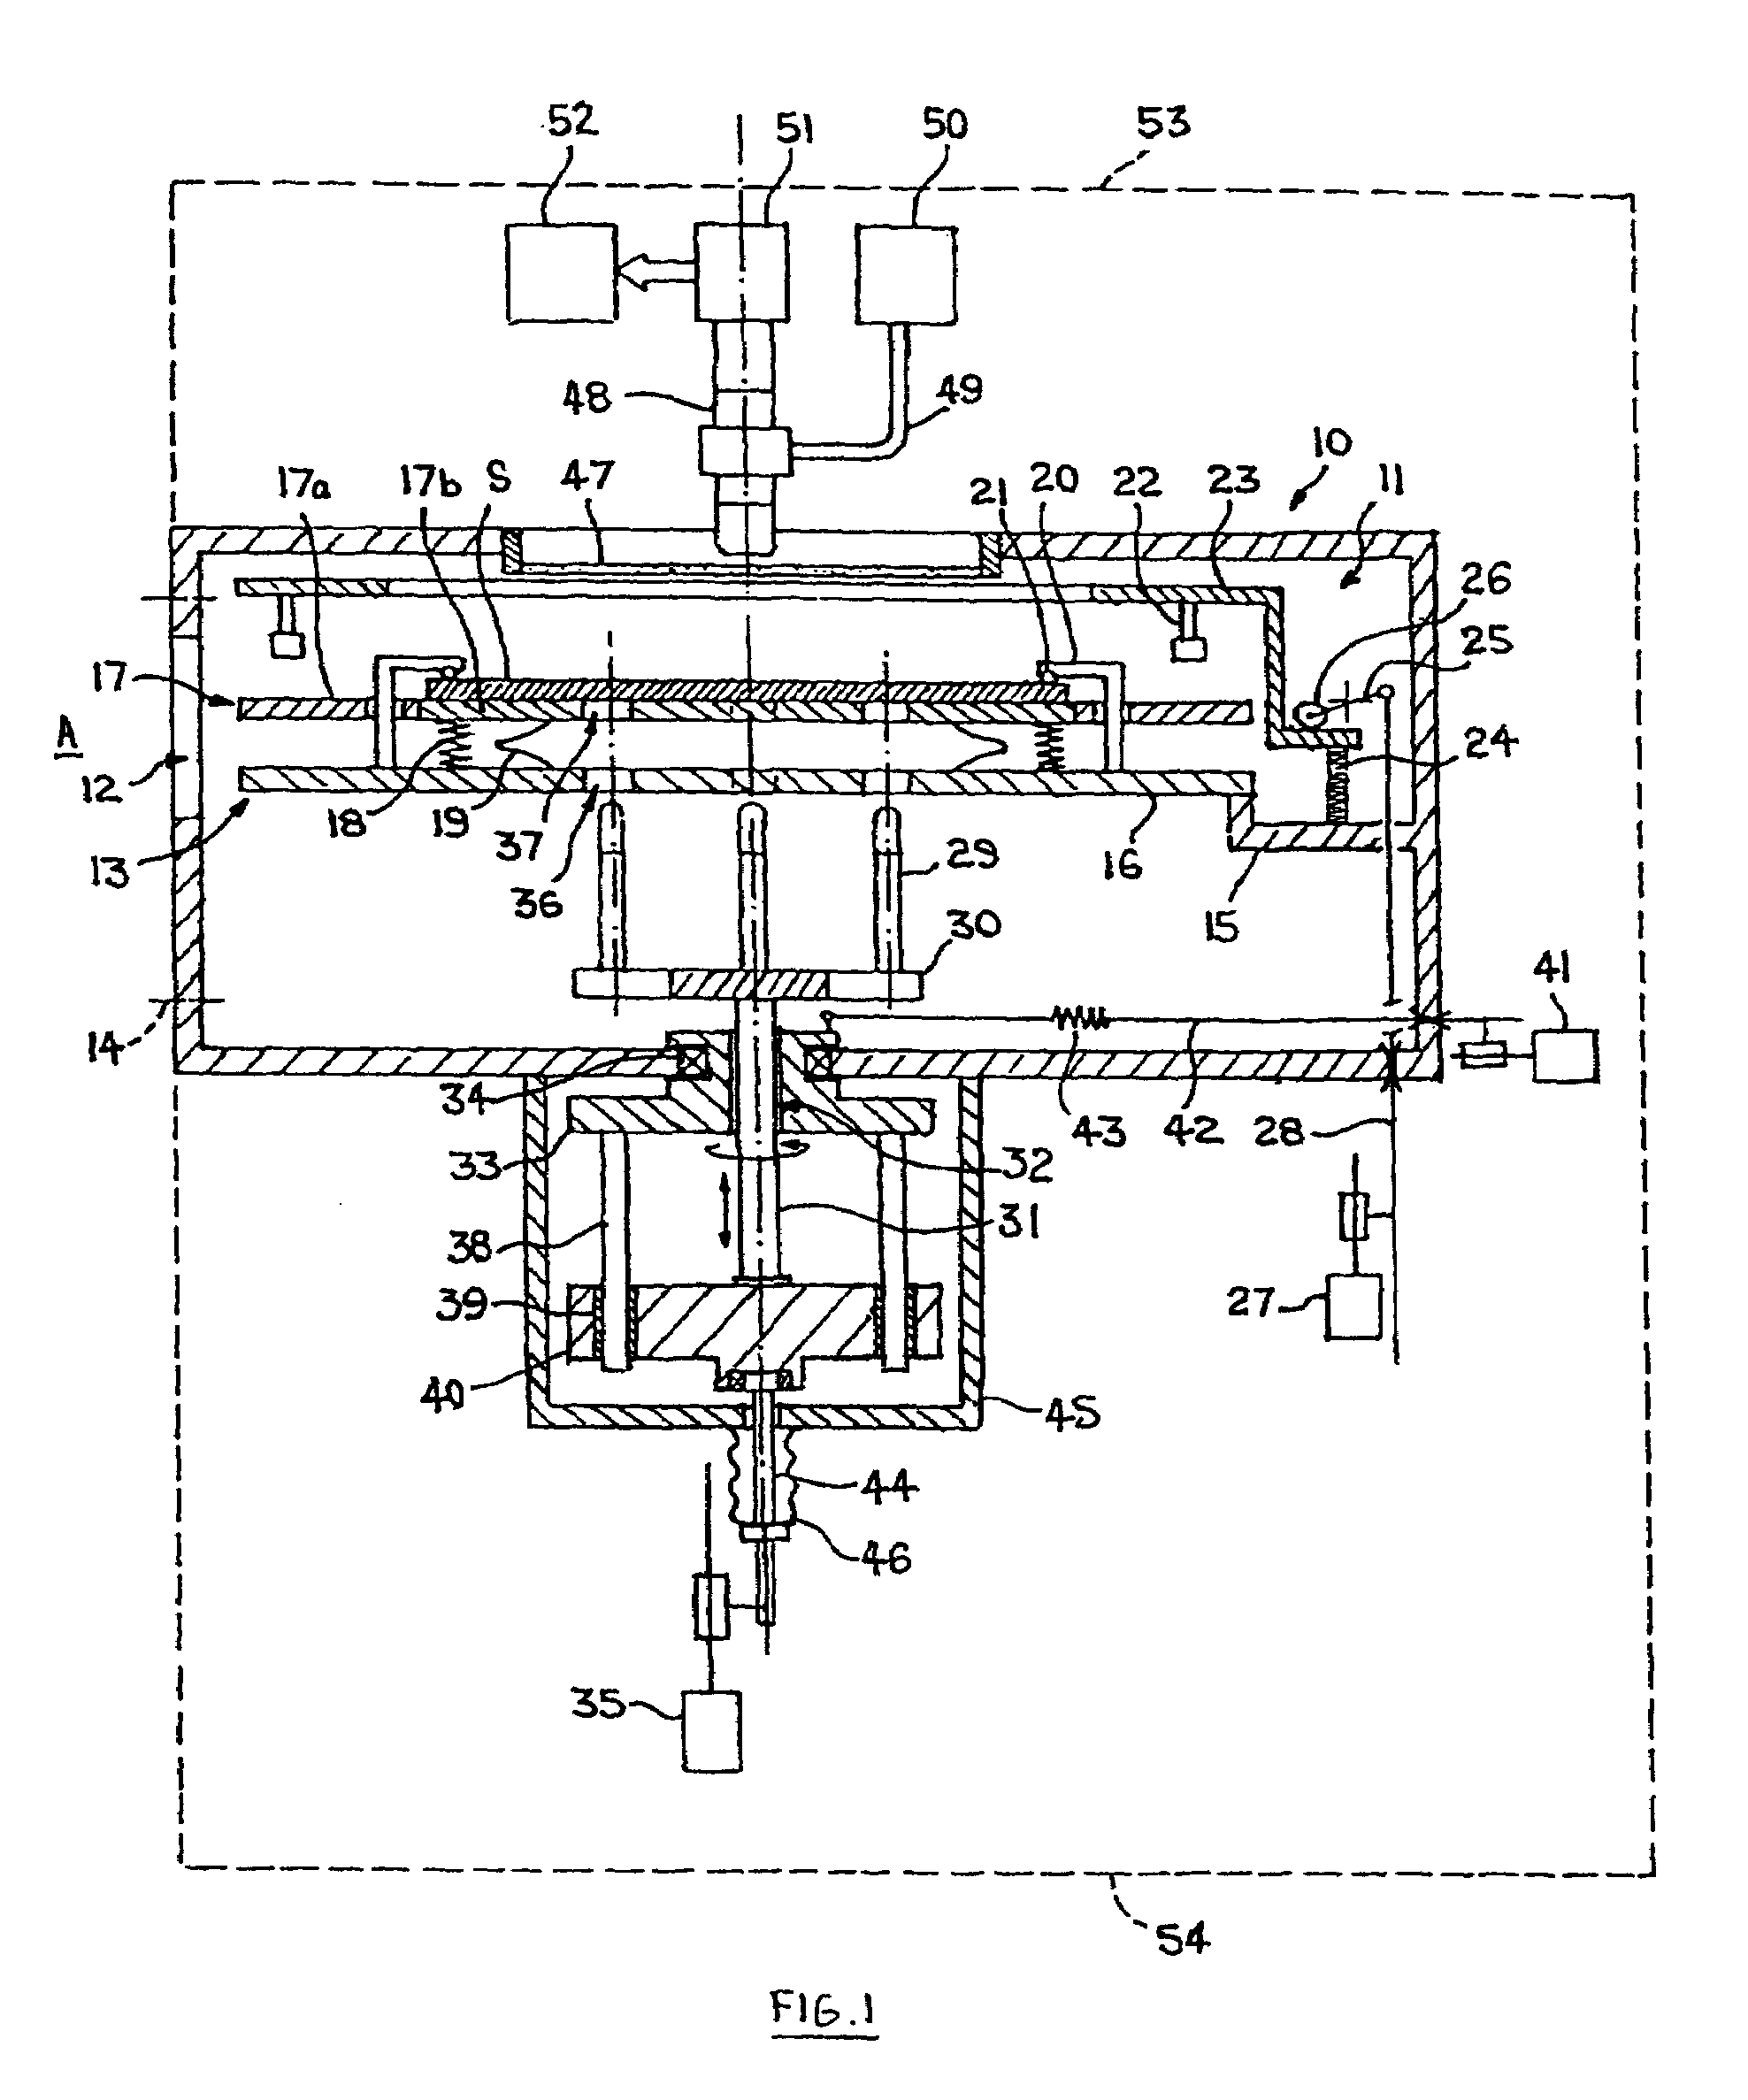 Substrate loading and unloading apparatus